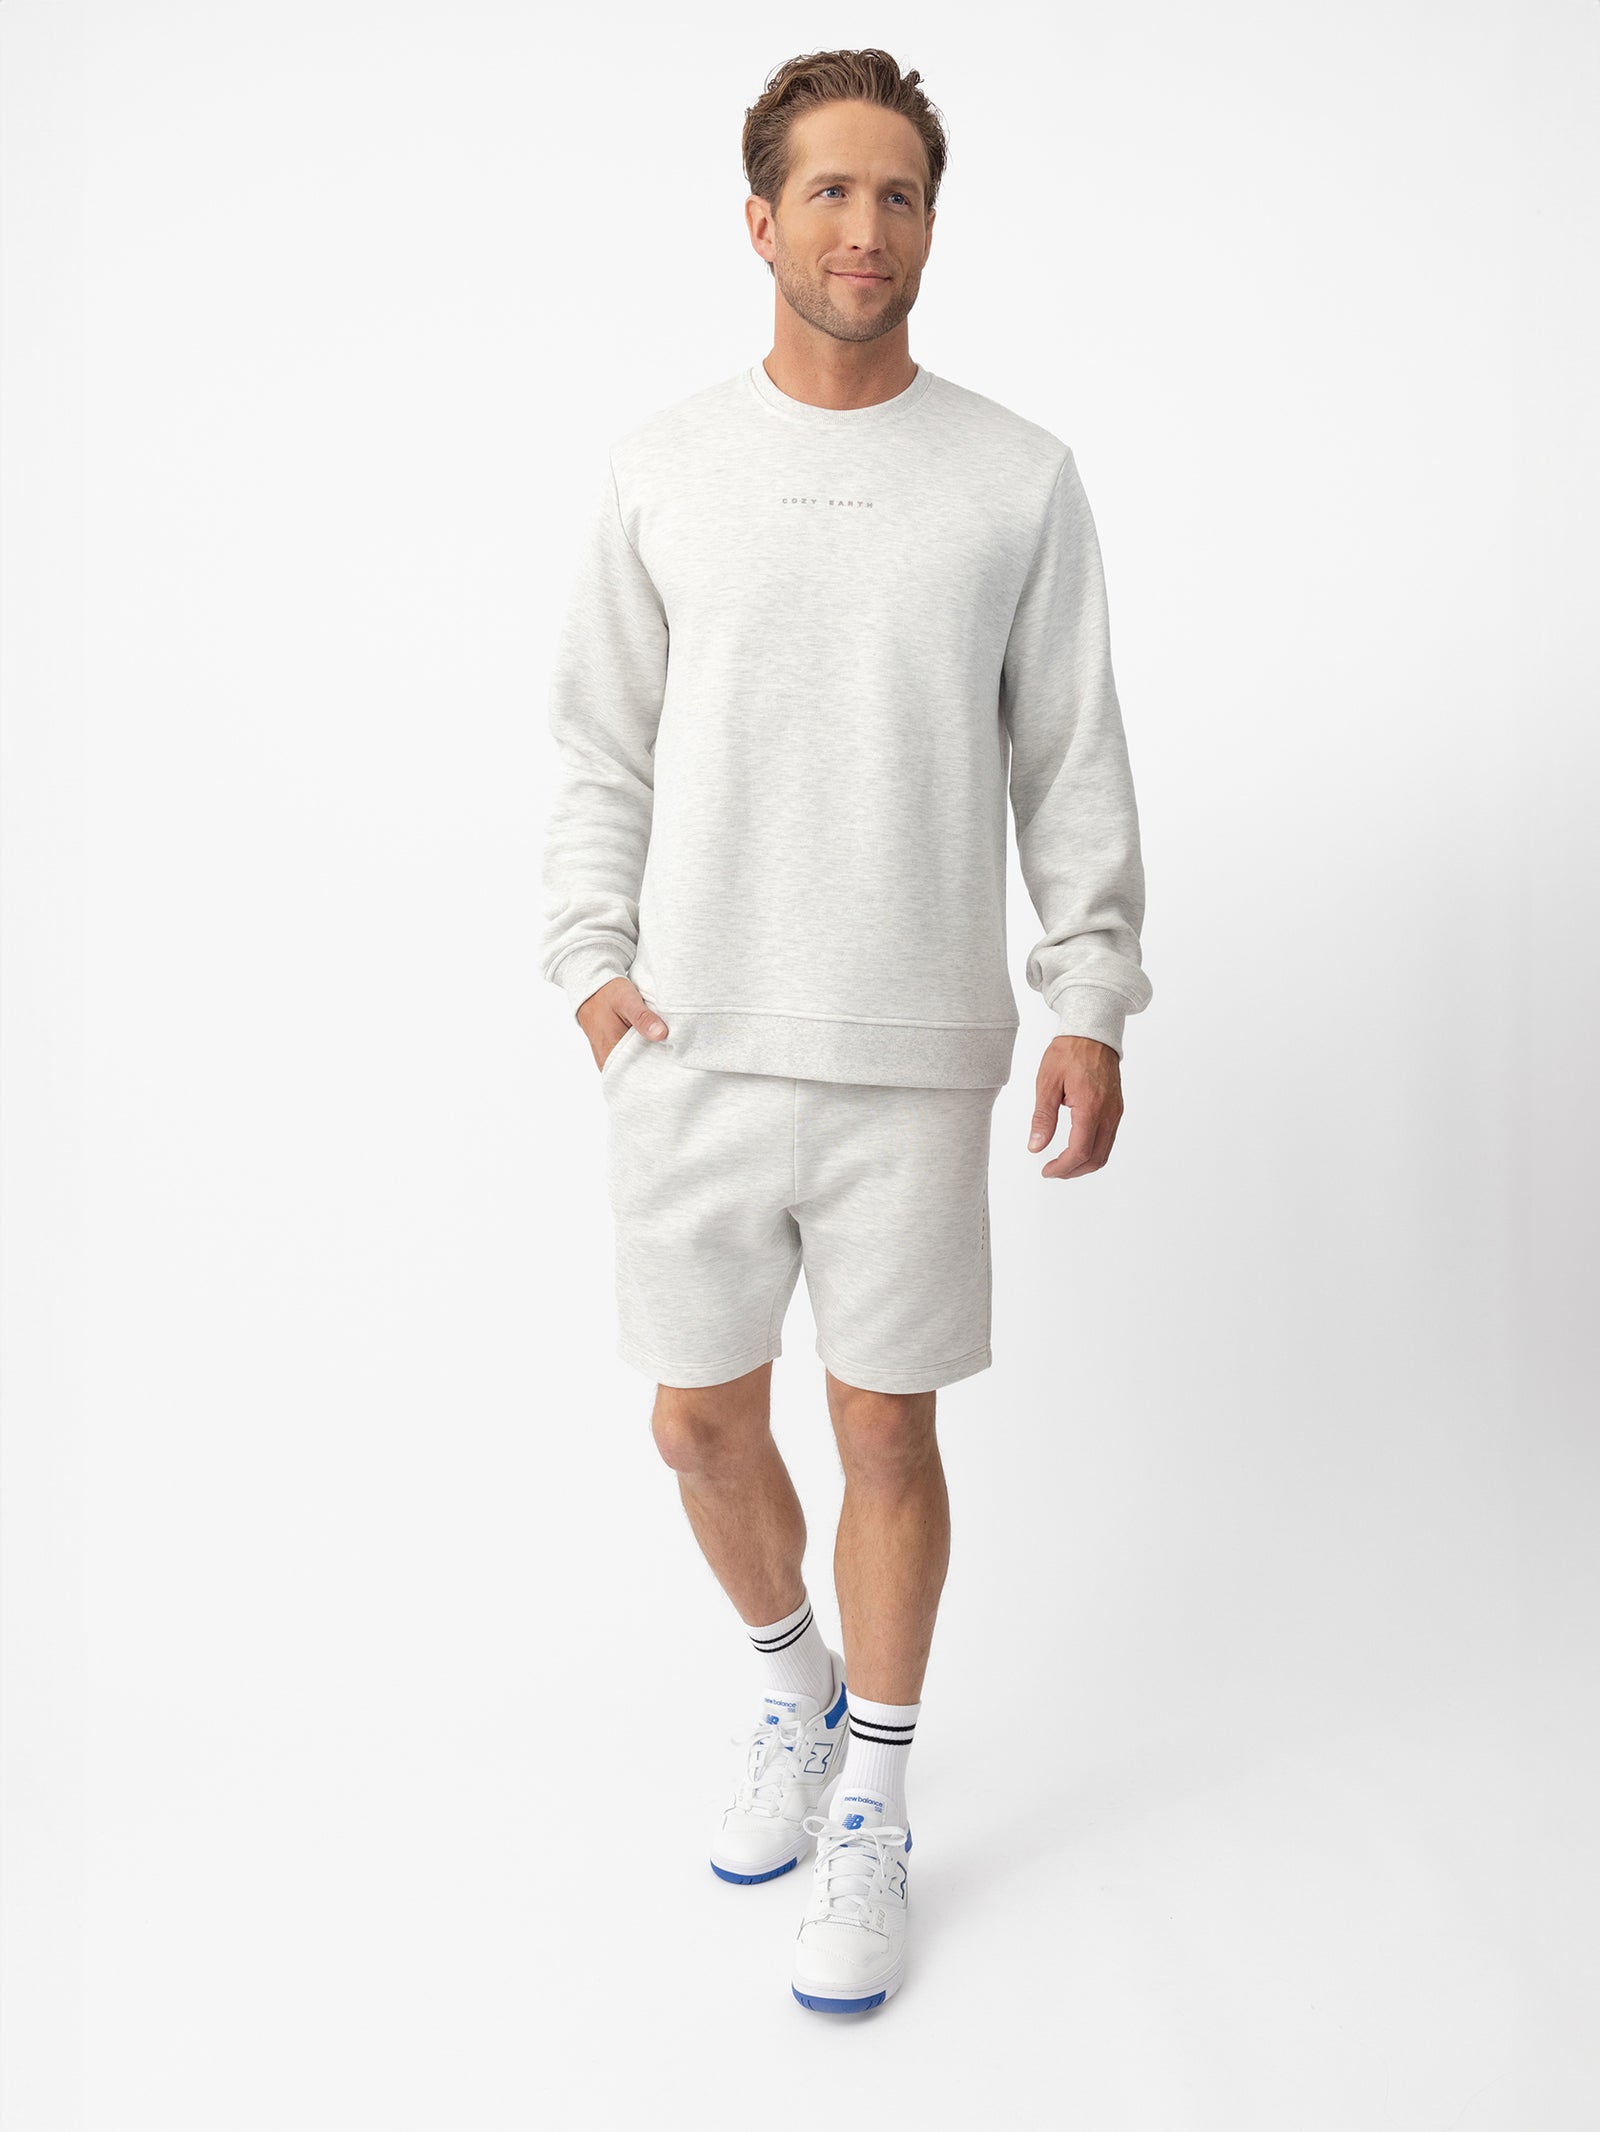 Man wearing heather grey cityscape shorts and pullover with white background 